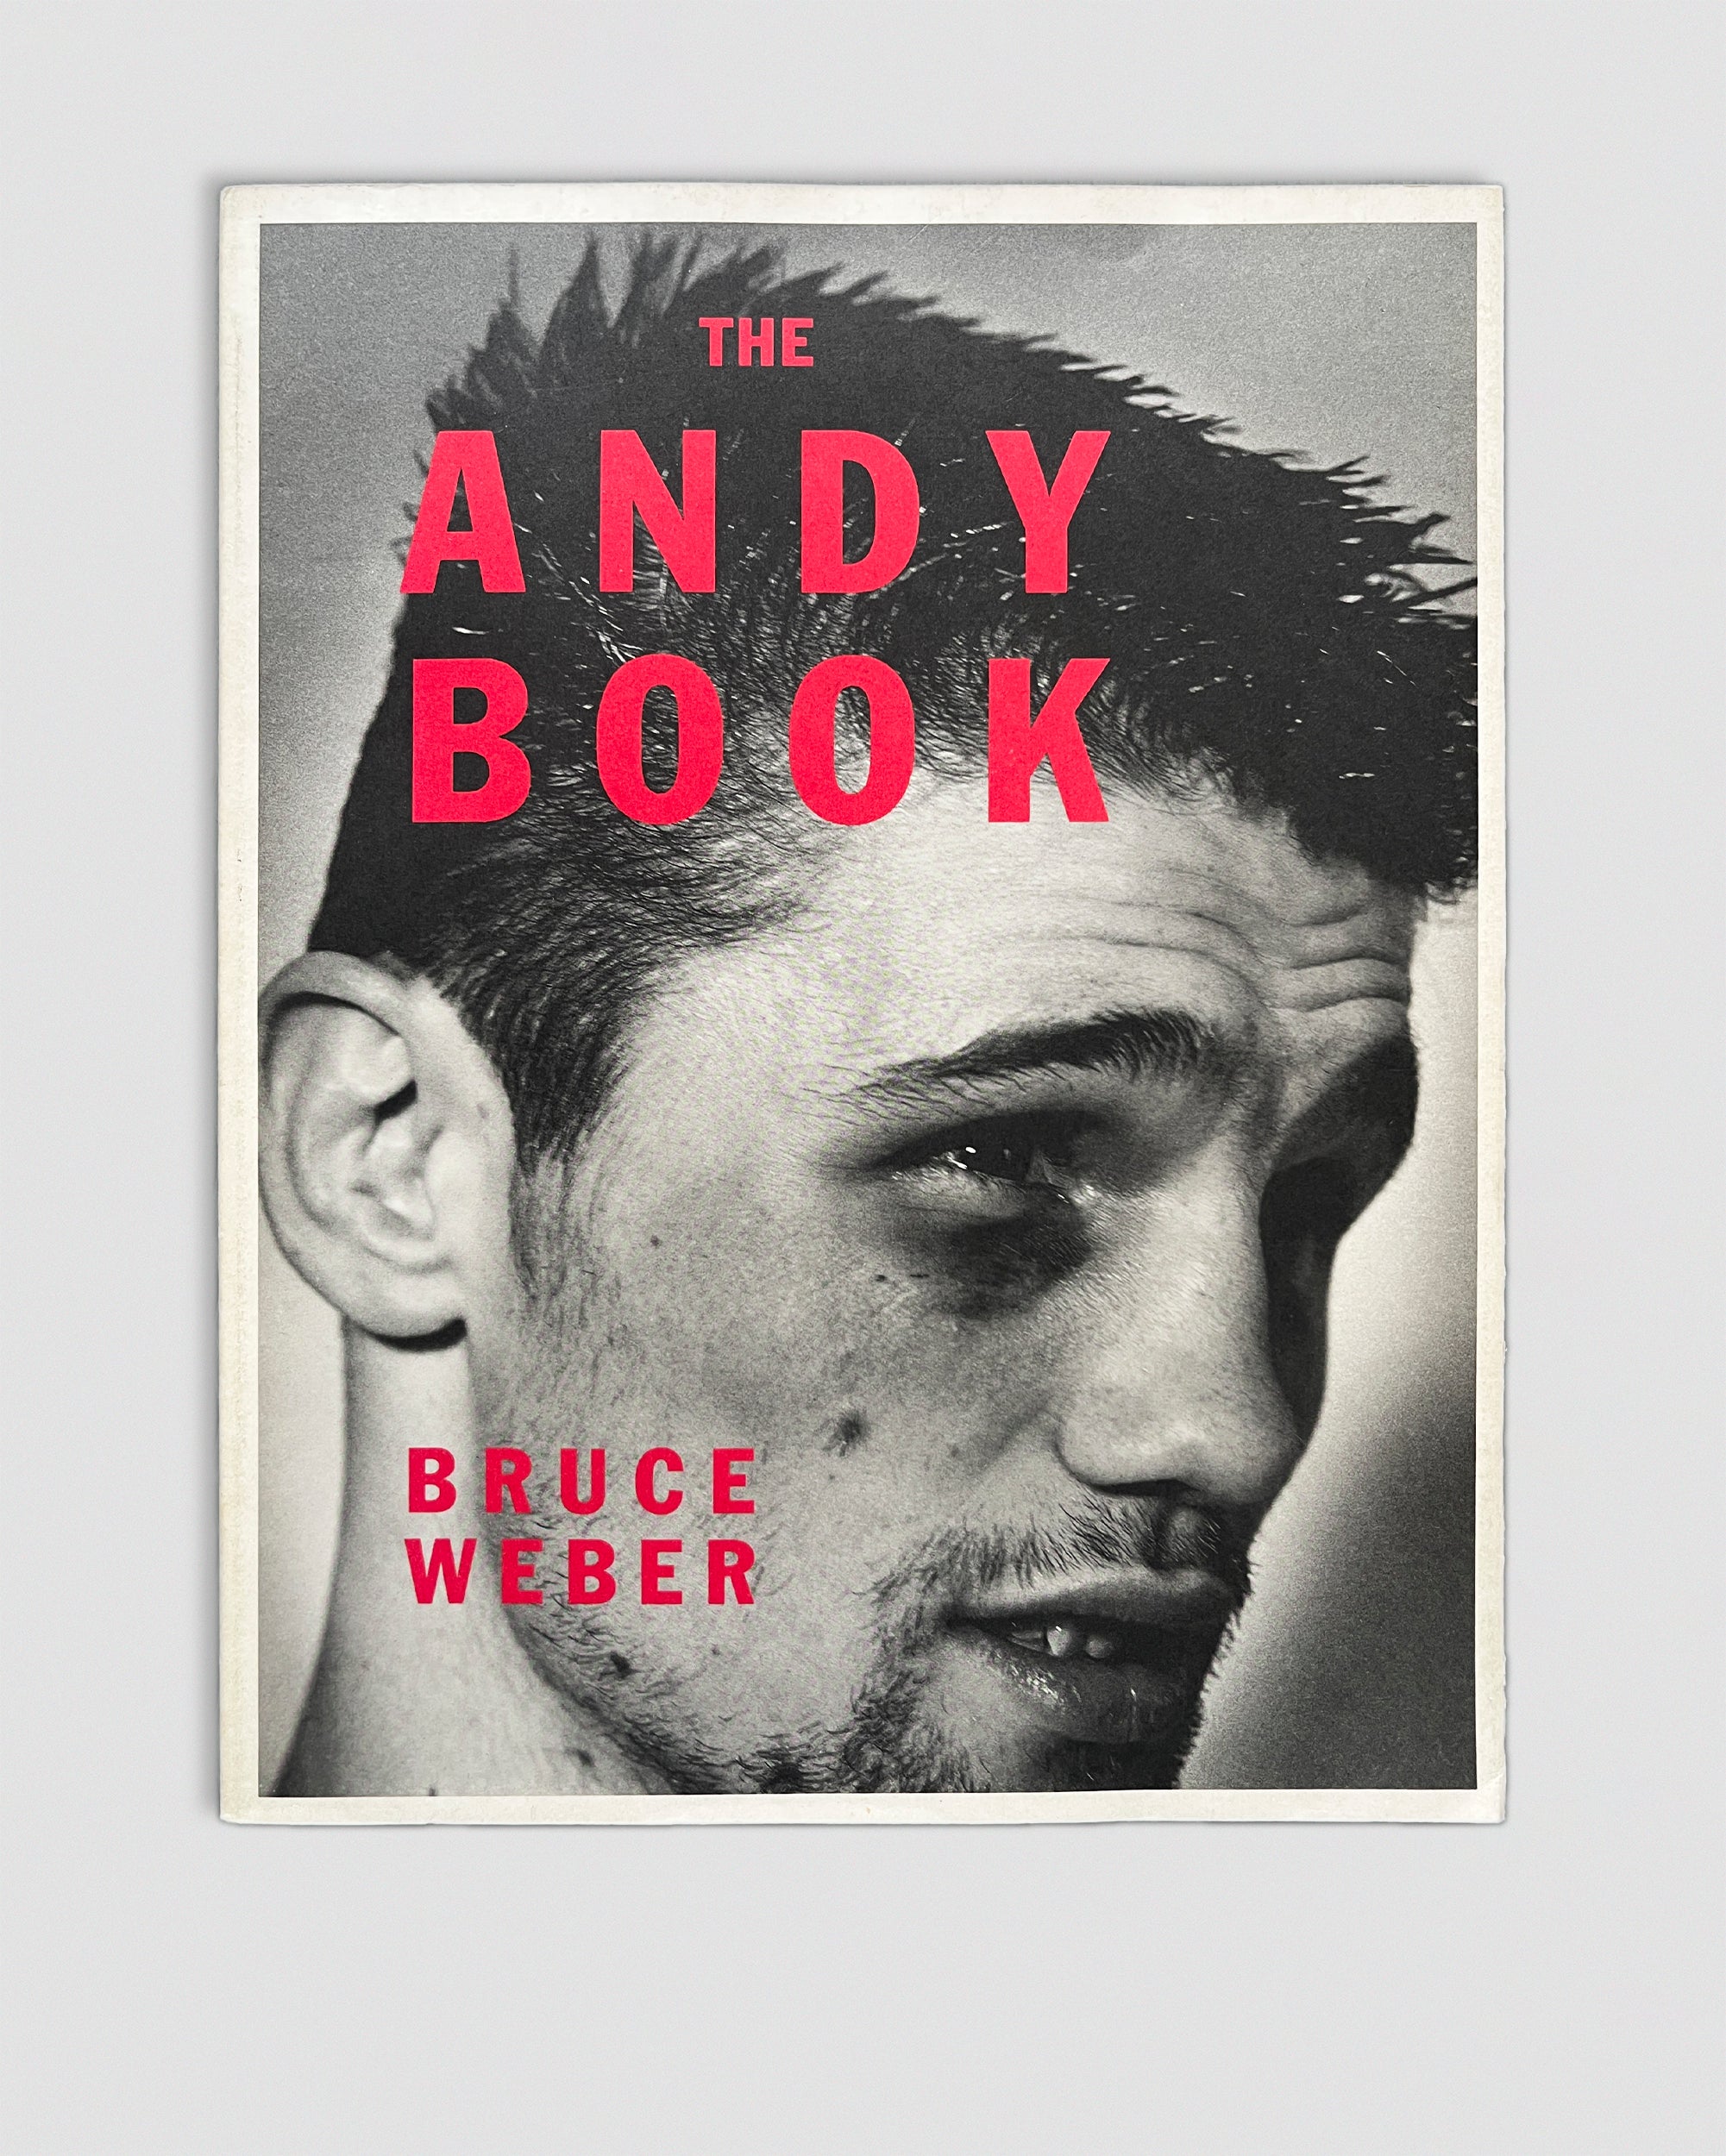 The Andy Book